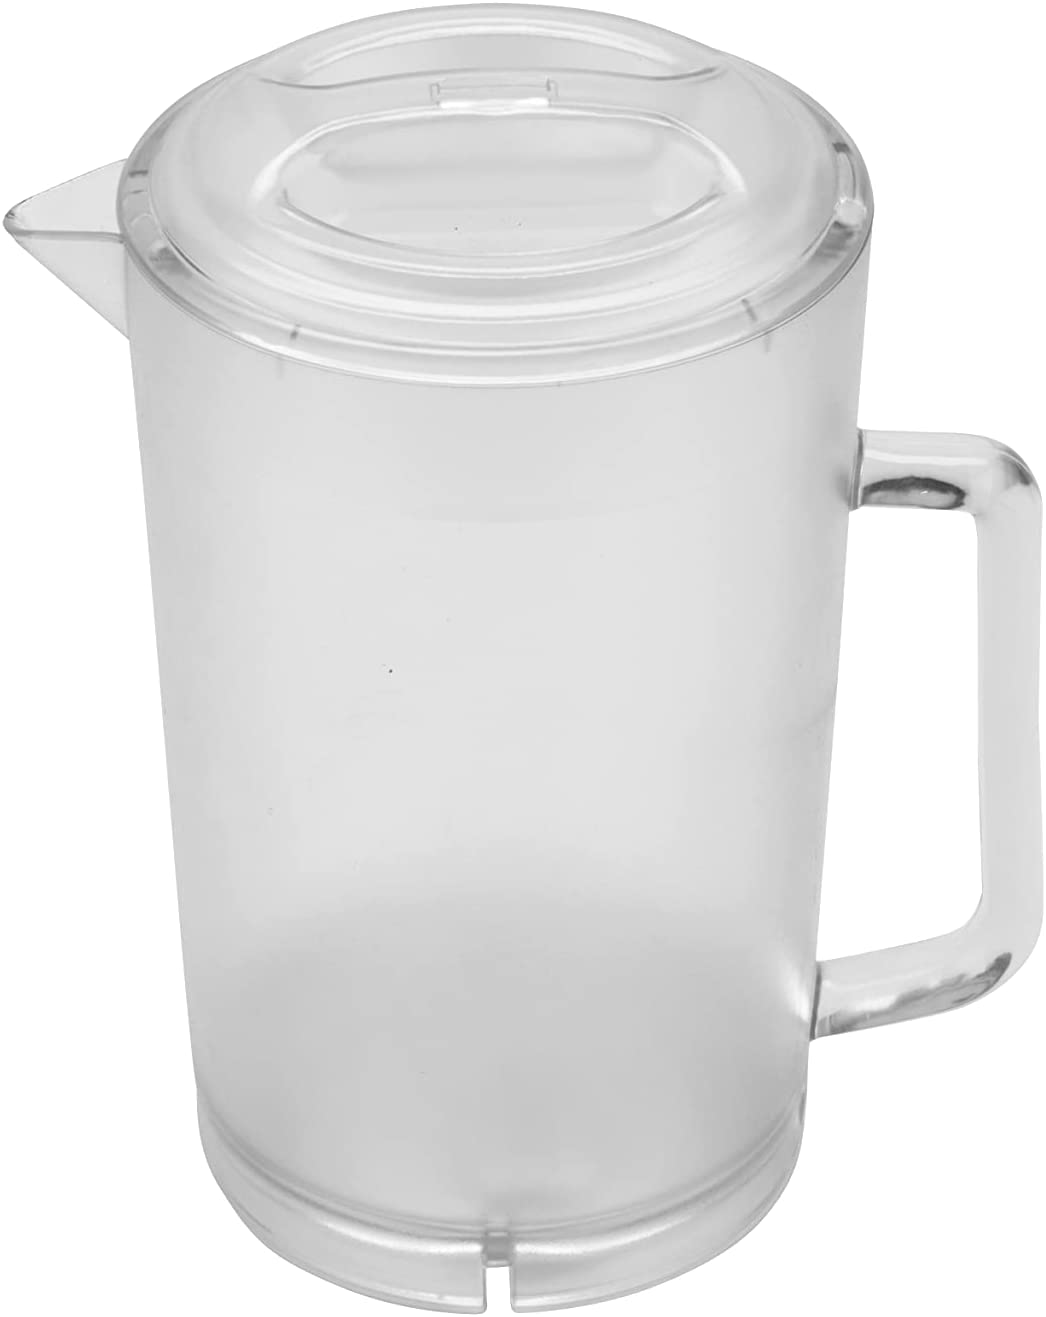 Rubbermaid Simple Pour 2 Quart Plastic Pitcher Clear With Red Lid 9 Tall